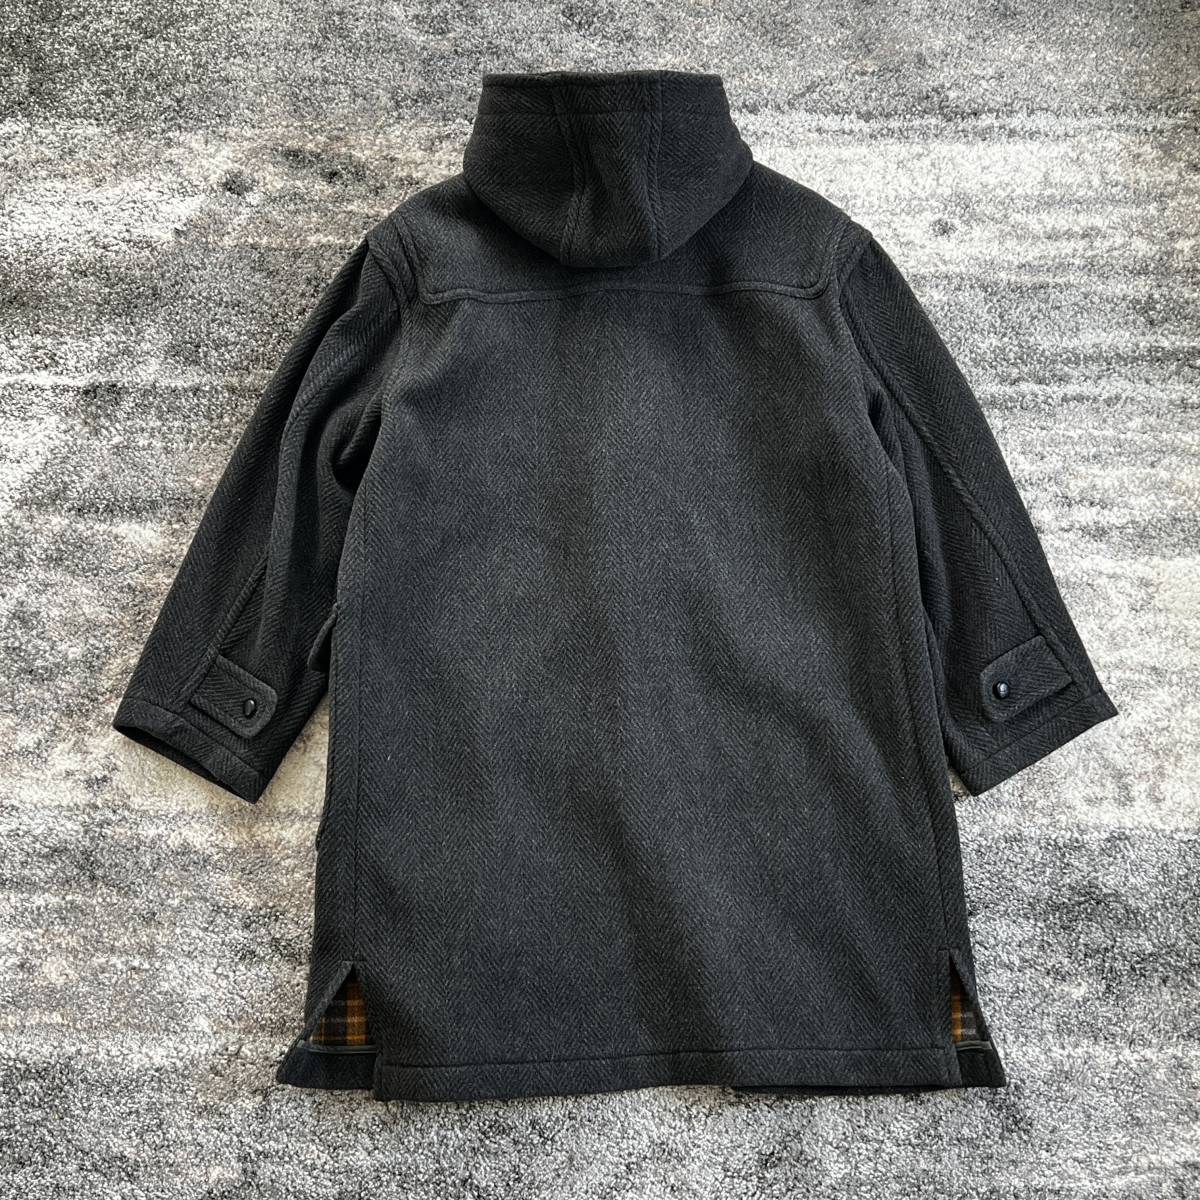 * super rare OLD DANIEL CREMIEUX Daniel kremyu duffle coat made in Japan DC4509 reverse side side check double faced dark gray oversize 